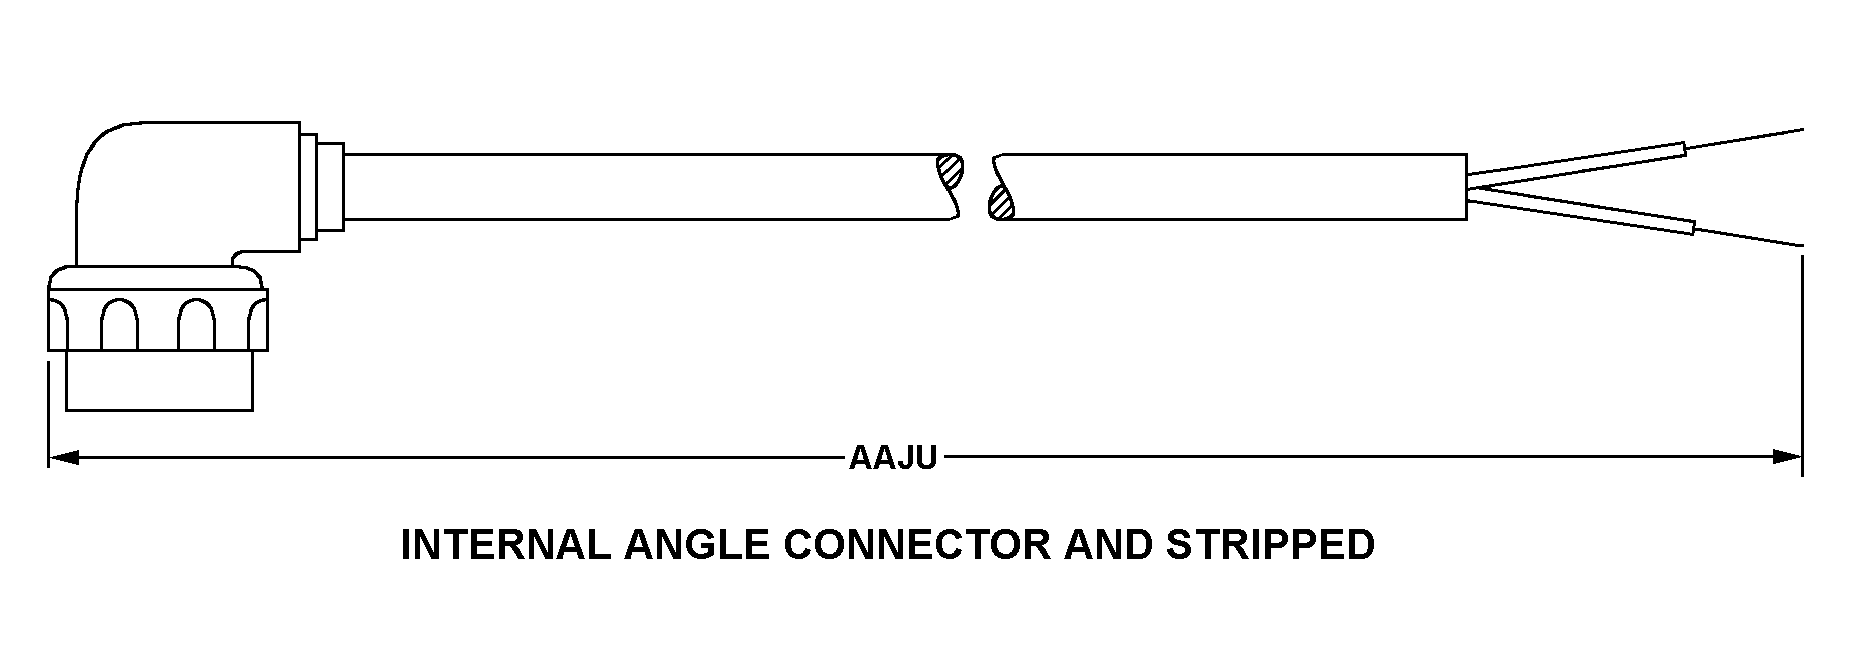 INTERNAL ANGLE CONNECTOR AND STRIPPED style nsn 5995-01-302-7485